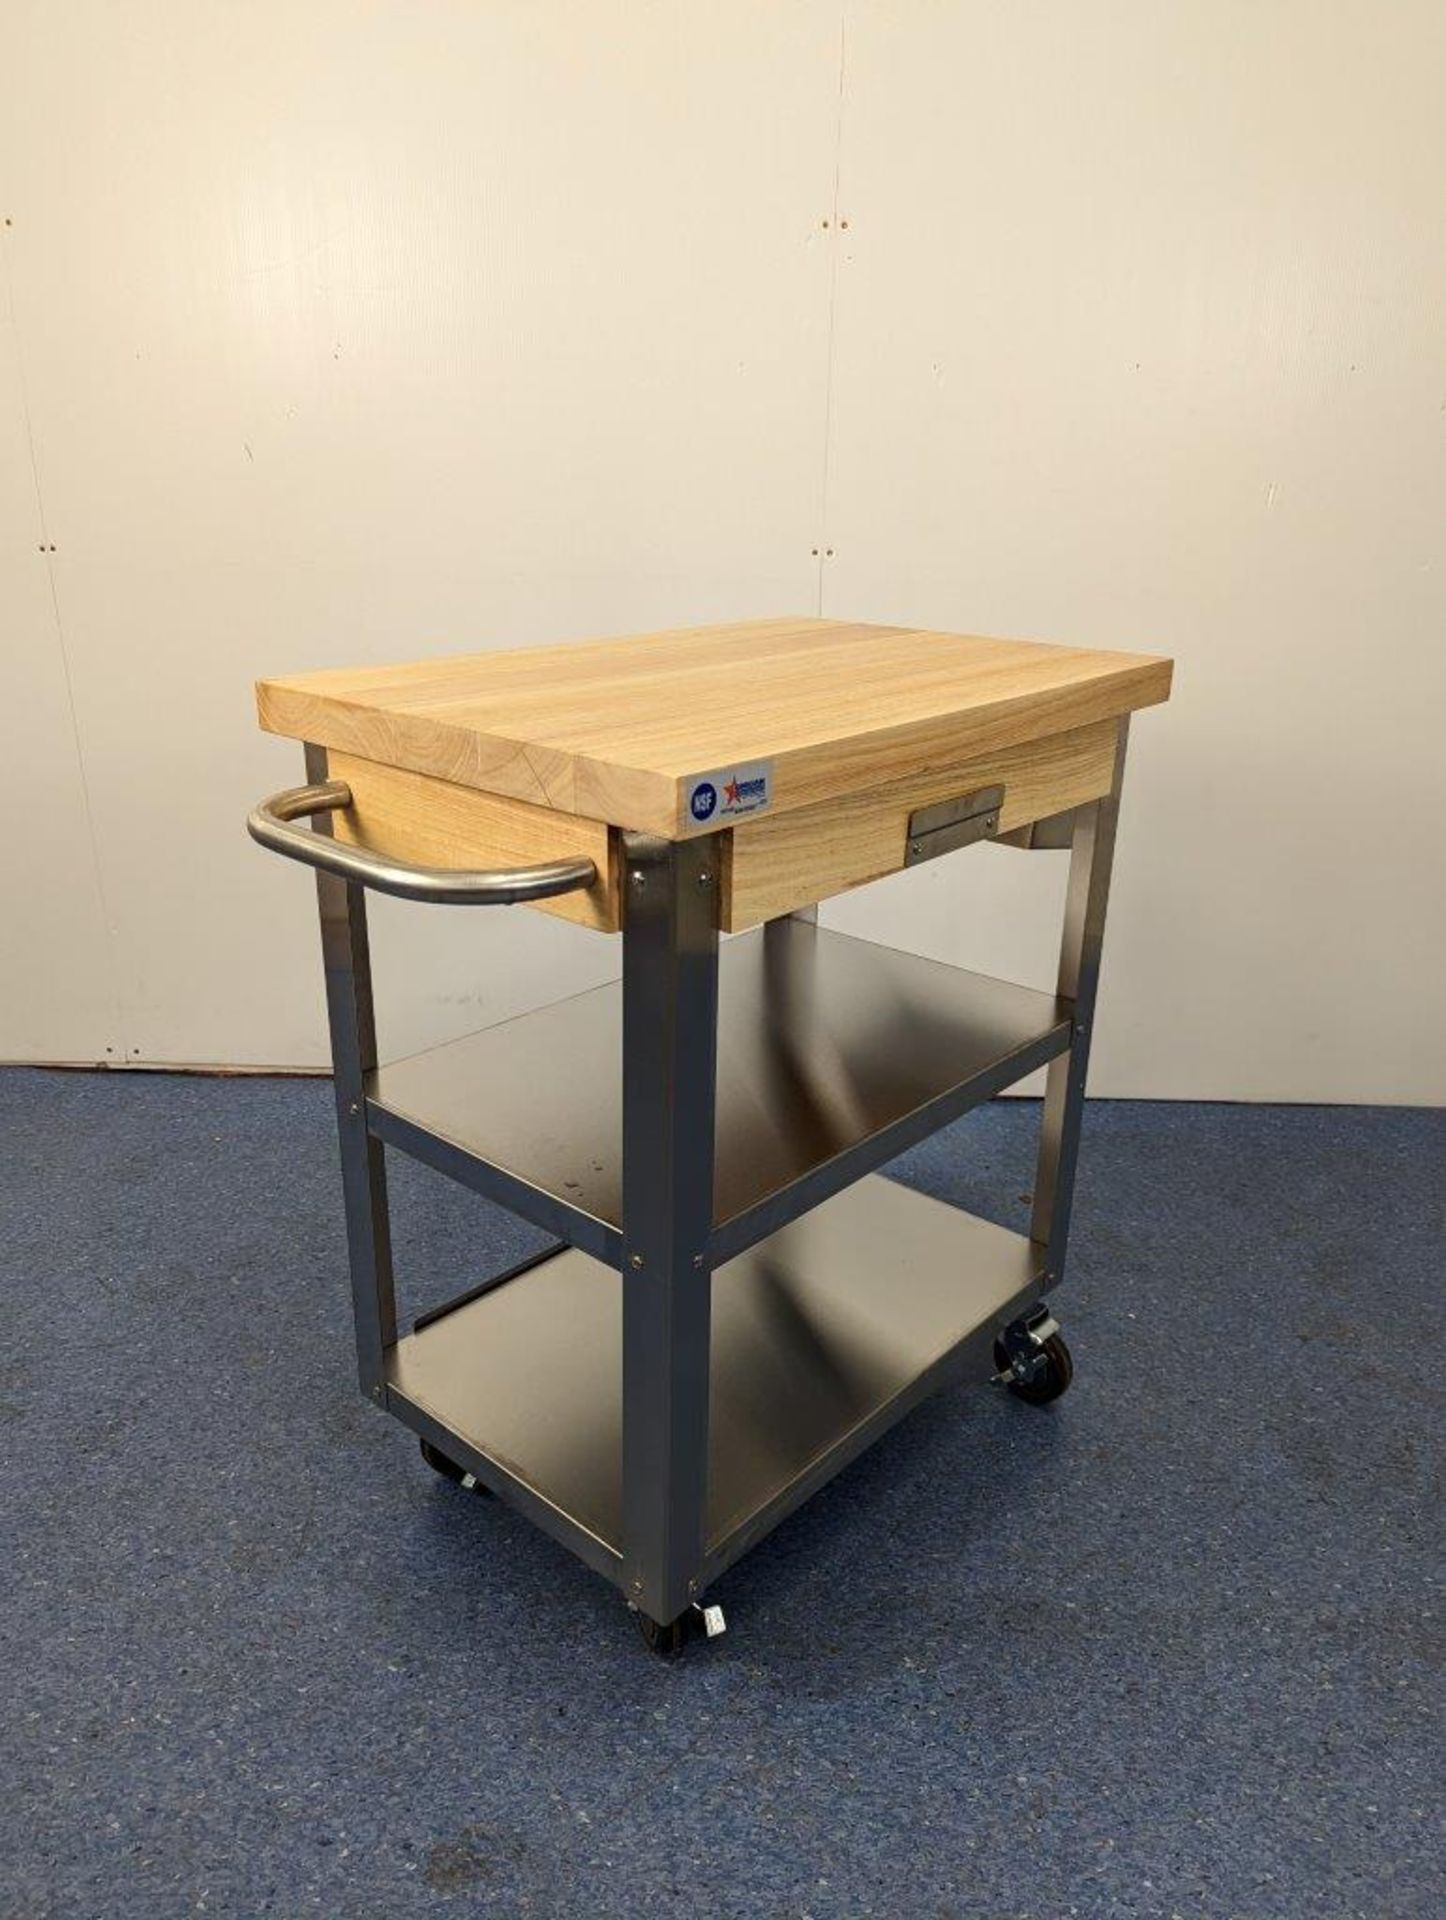 MOBILE FOOD PREPARATION TABLE/CART, OMCAN 41516 - Image 4 of 6